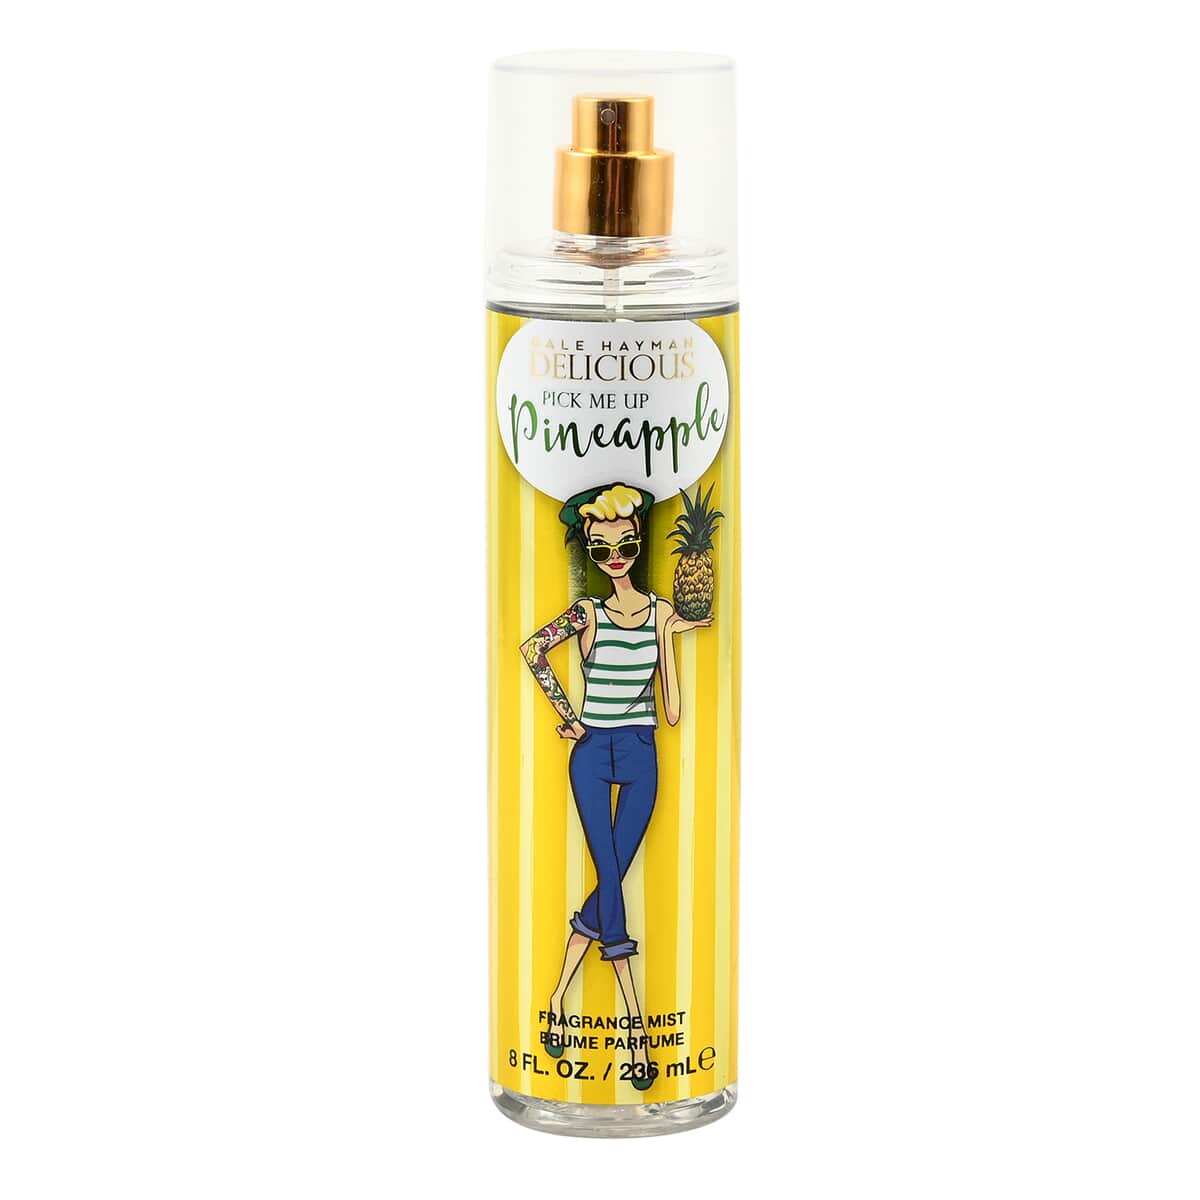 Gale Hayman Delicious PINEAPPLE Body Spray 8 oz image number 0